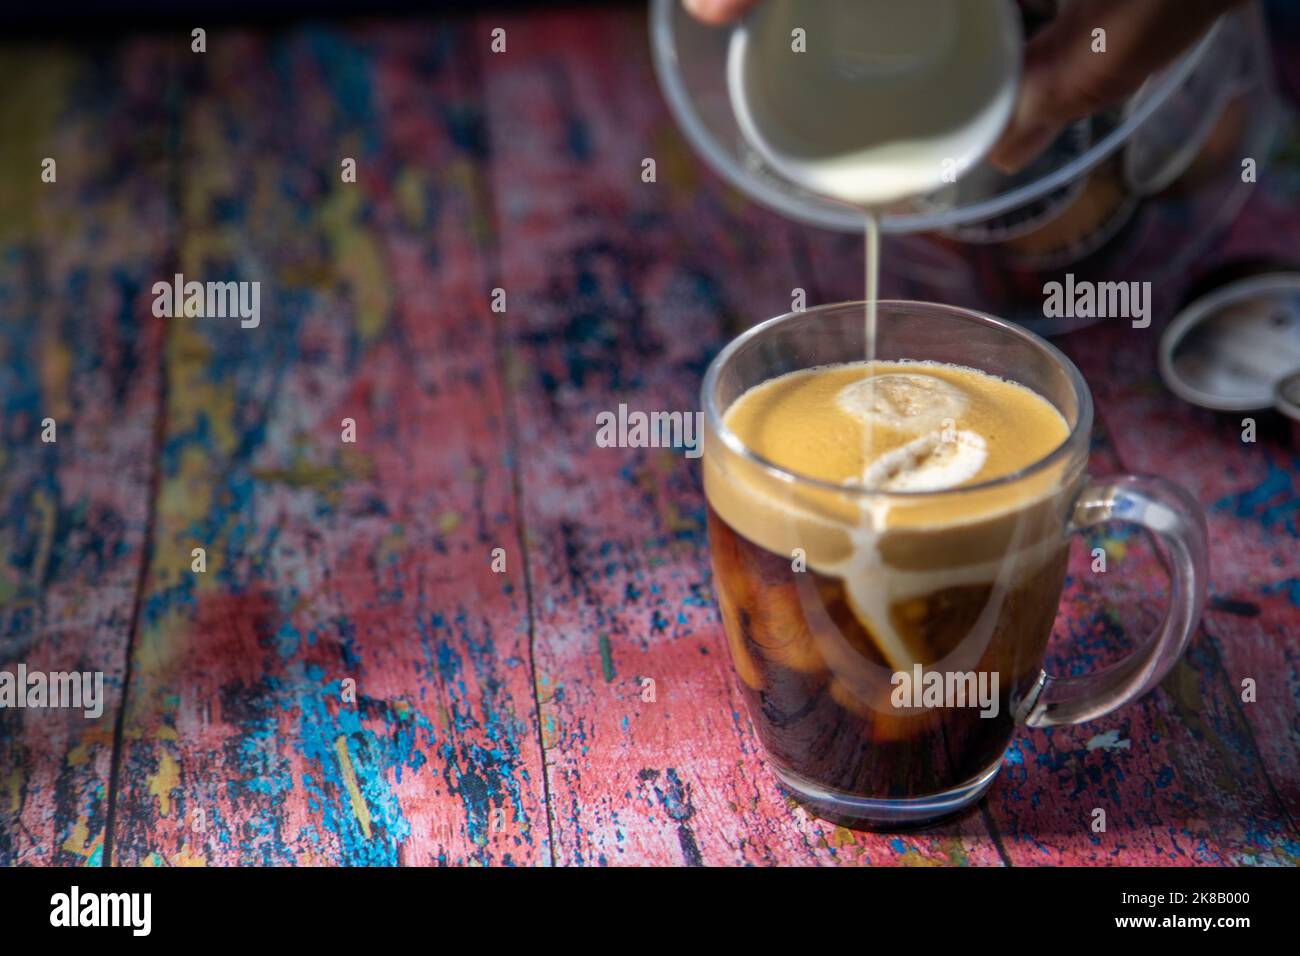 Americano With Cream Being Poured Into Drink Stock Photo